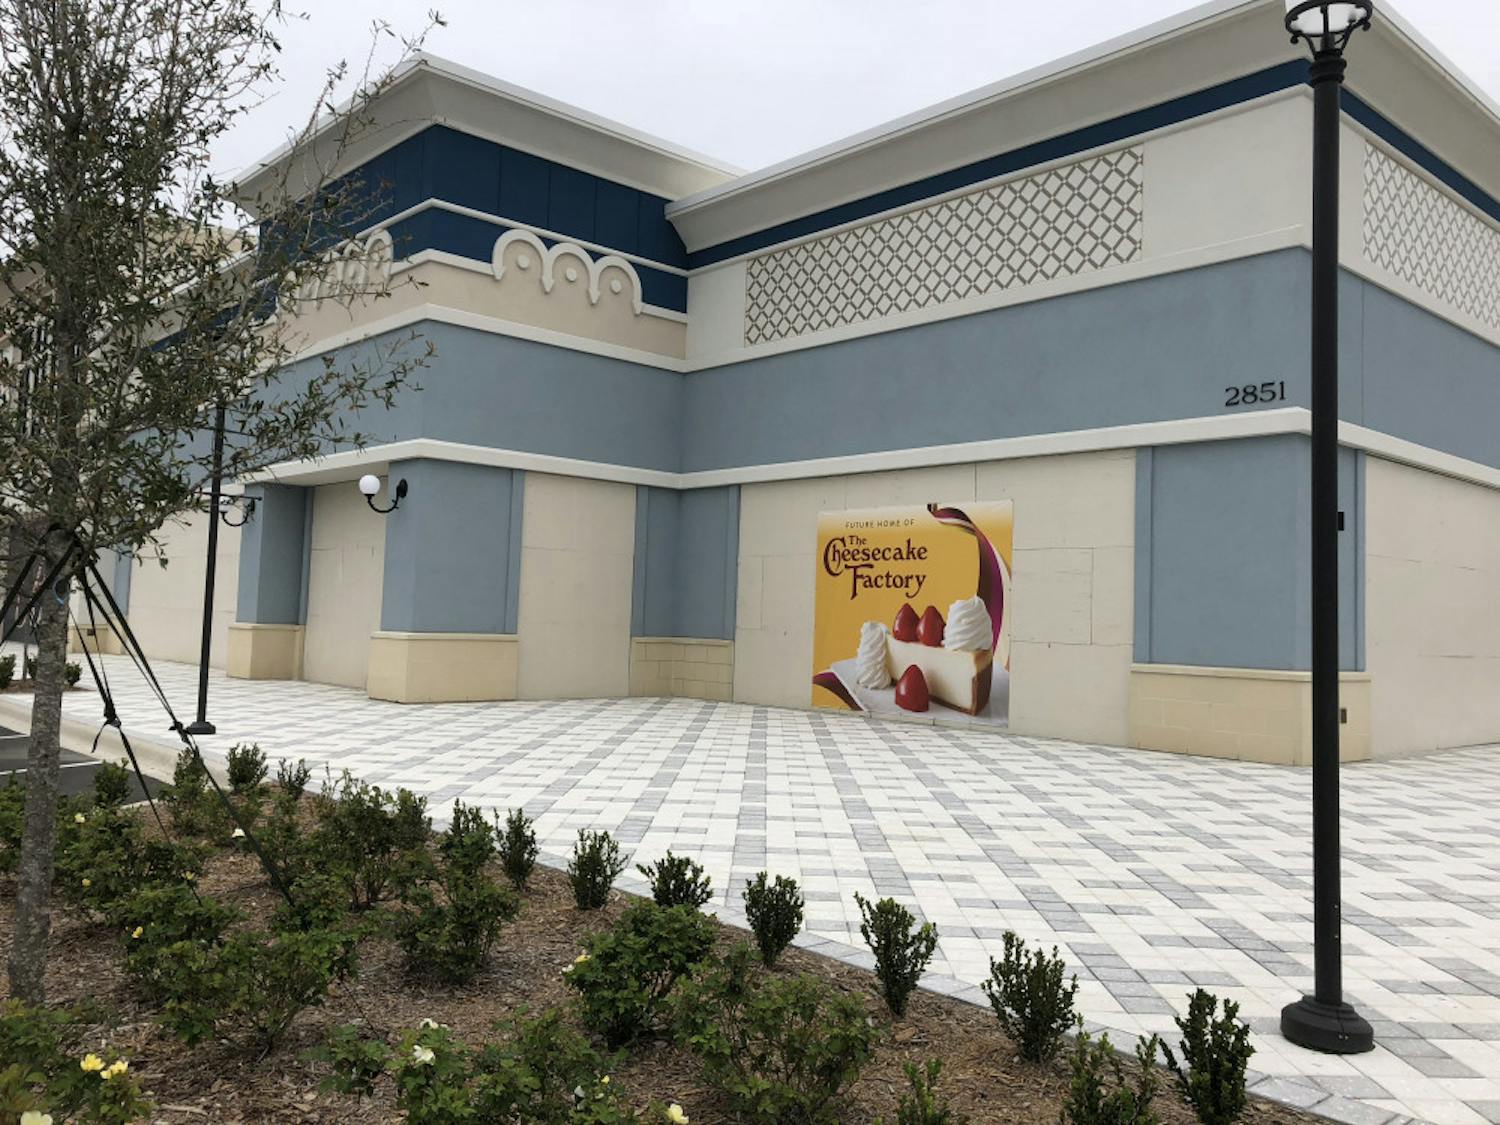 The Cheesecake Factory will be opening in the Butler Town Center at 2851 SW 35th Place next to Whole Foods and behind Grub Burger Bar in the fall. 